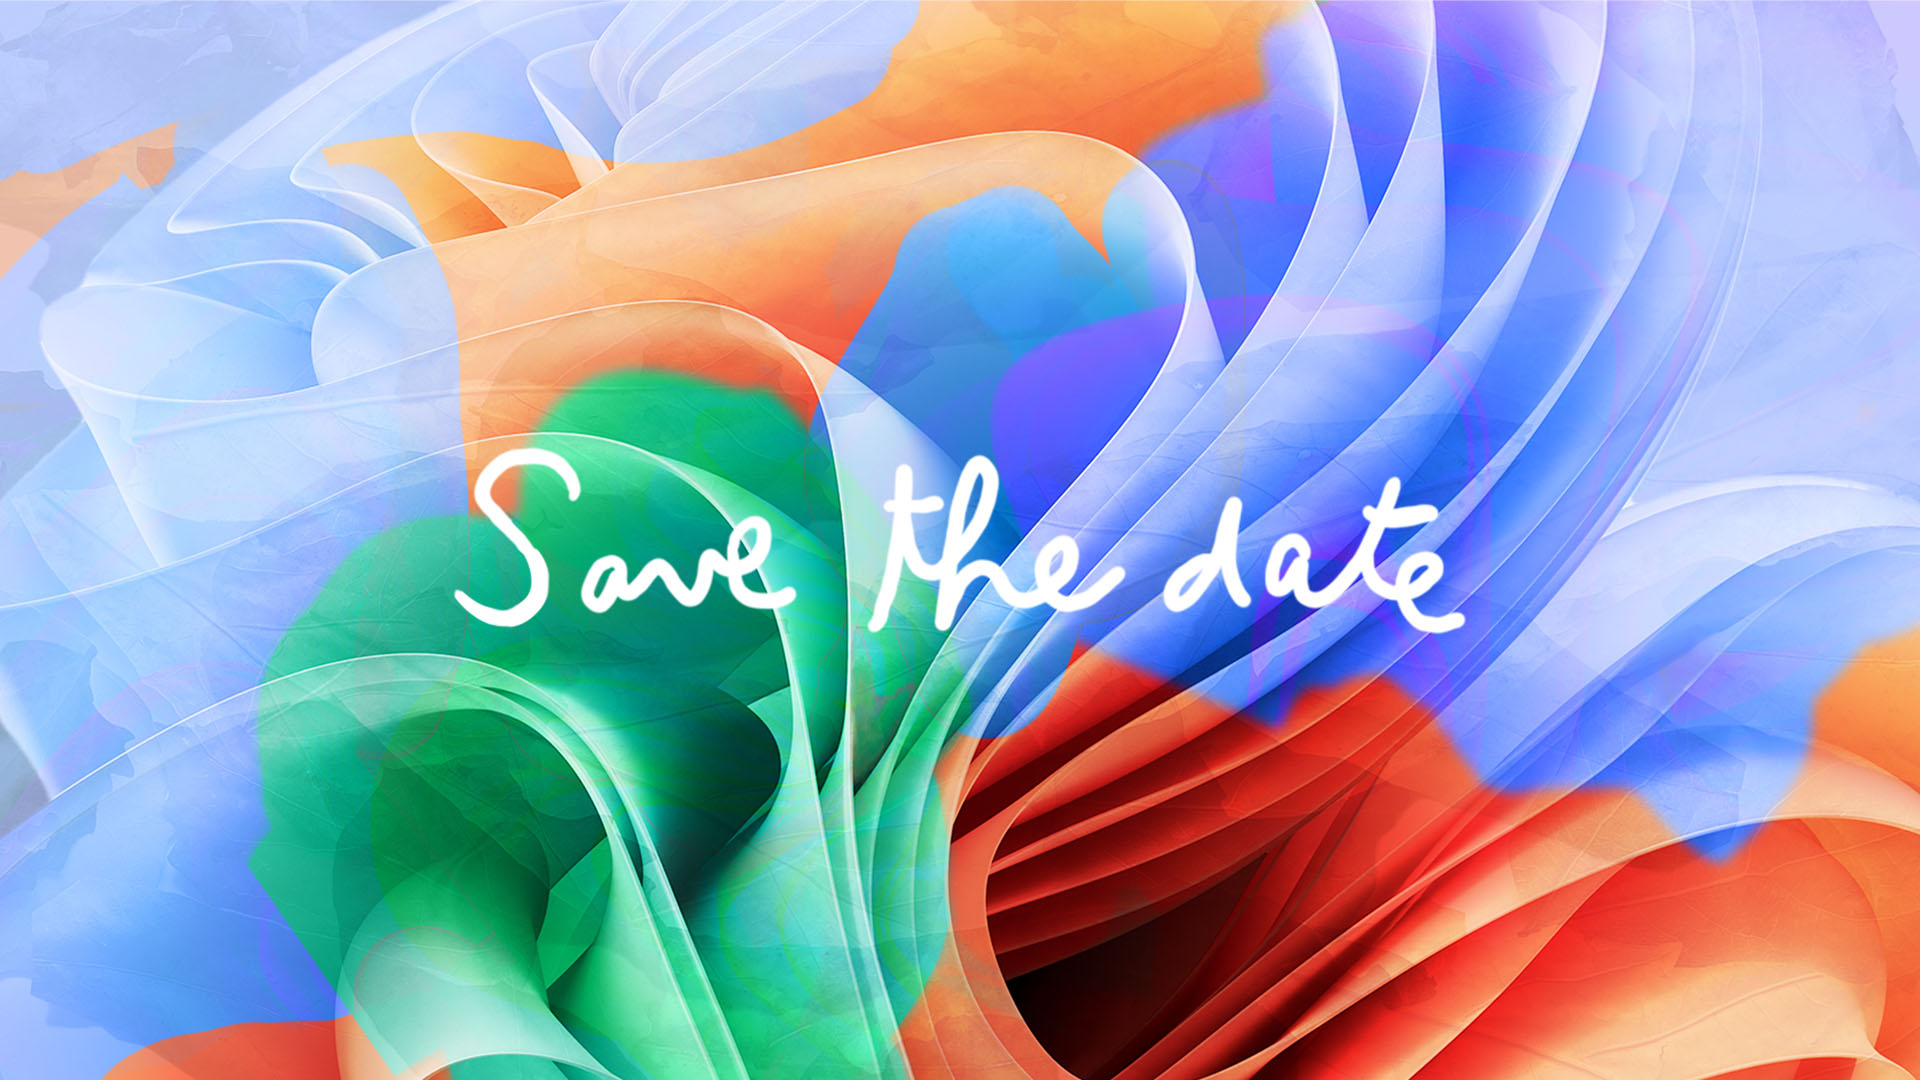 A stylized Microsoft Windows 11 background with Save the Date written over it